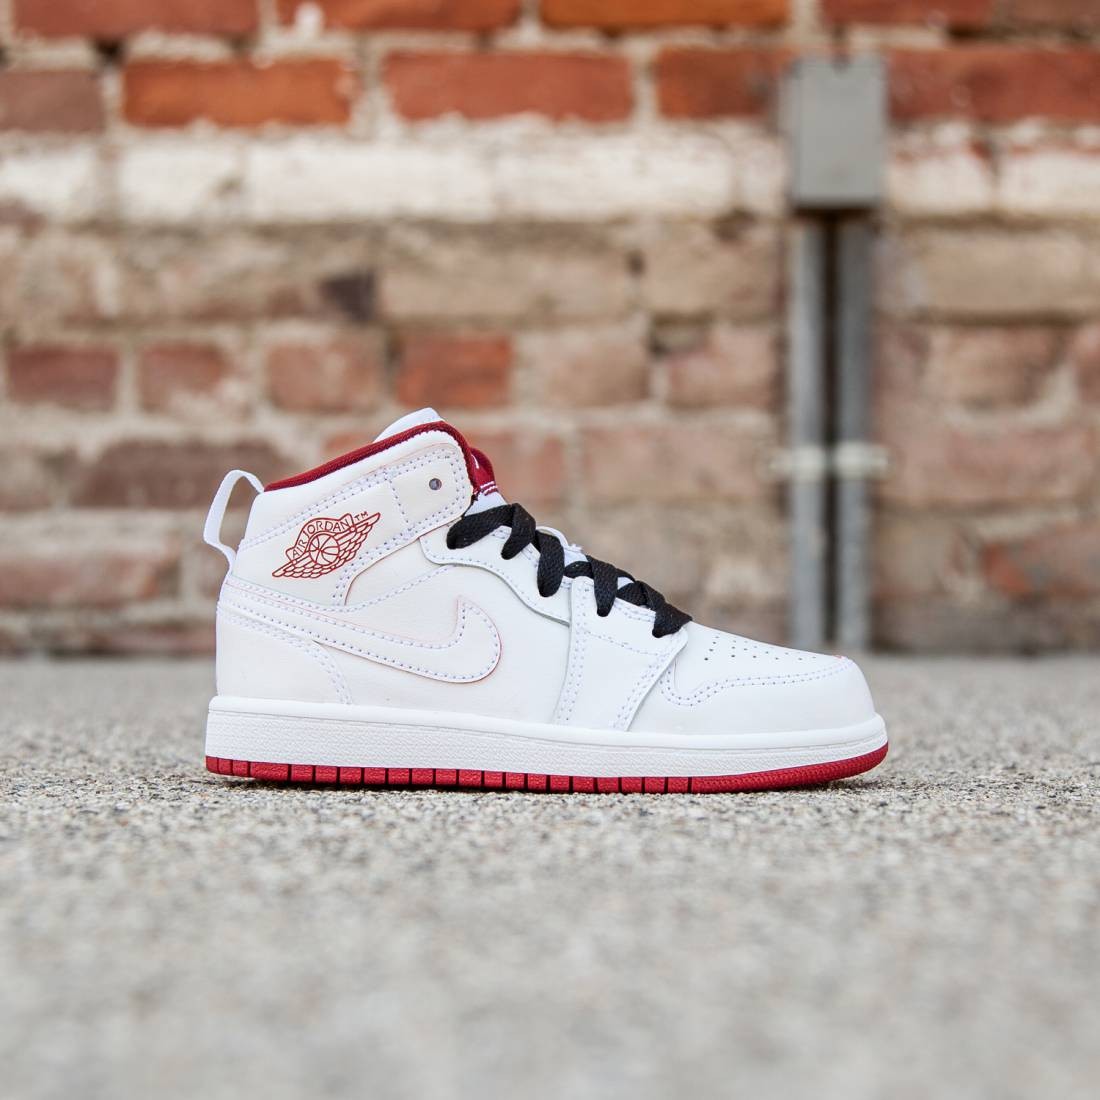 red black and white jordan 1s Sale ,up 